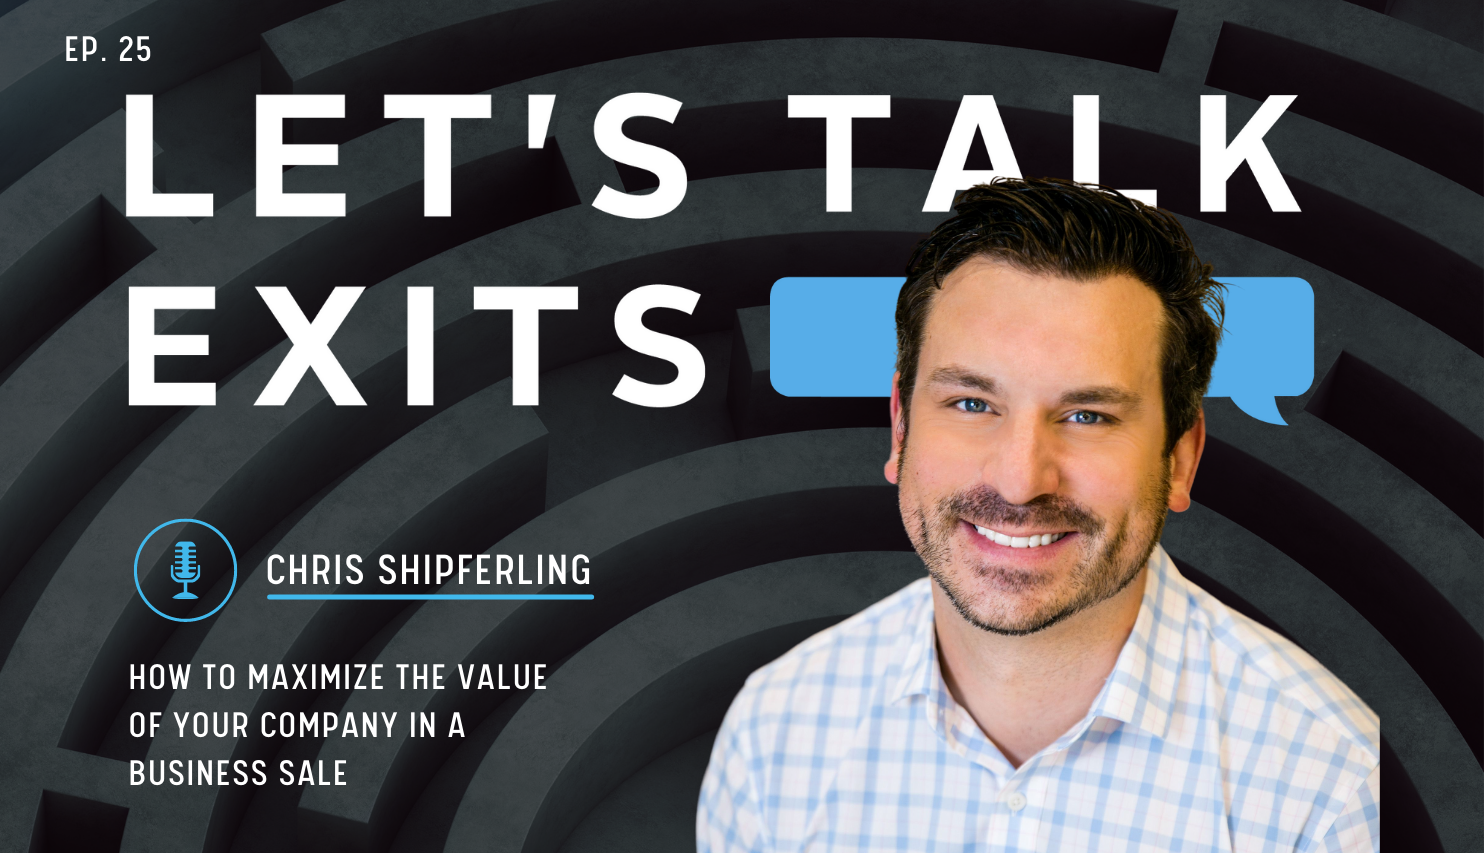 How to Maximize the Value of Your Company in a Business Sale with Chris Shipferling